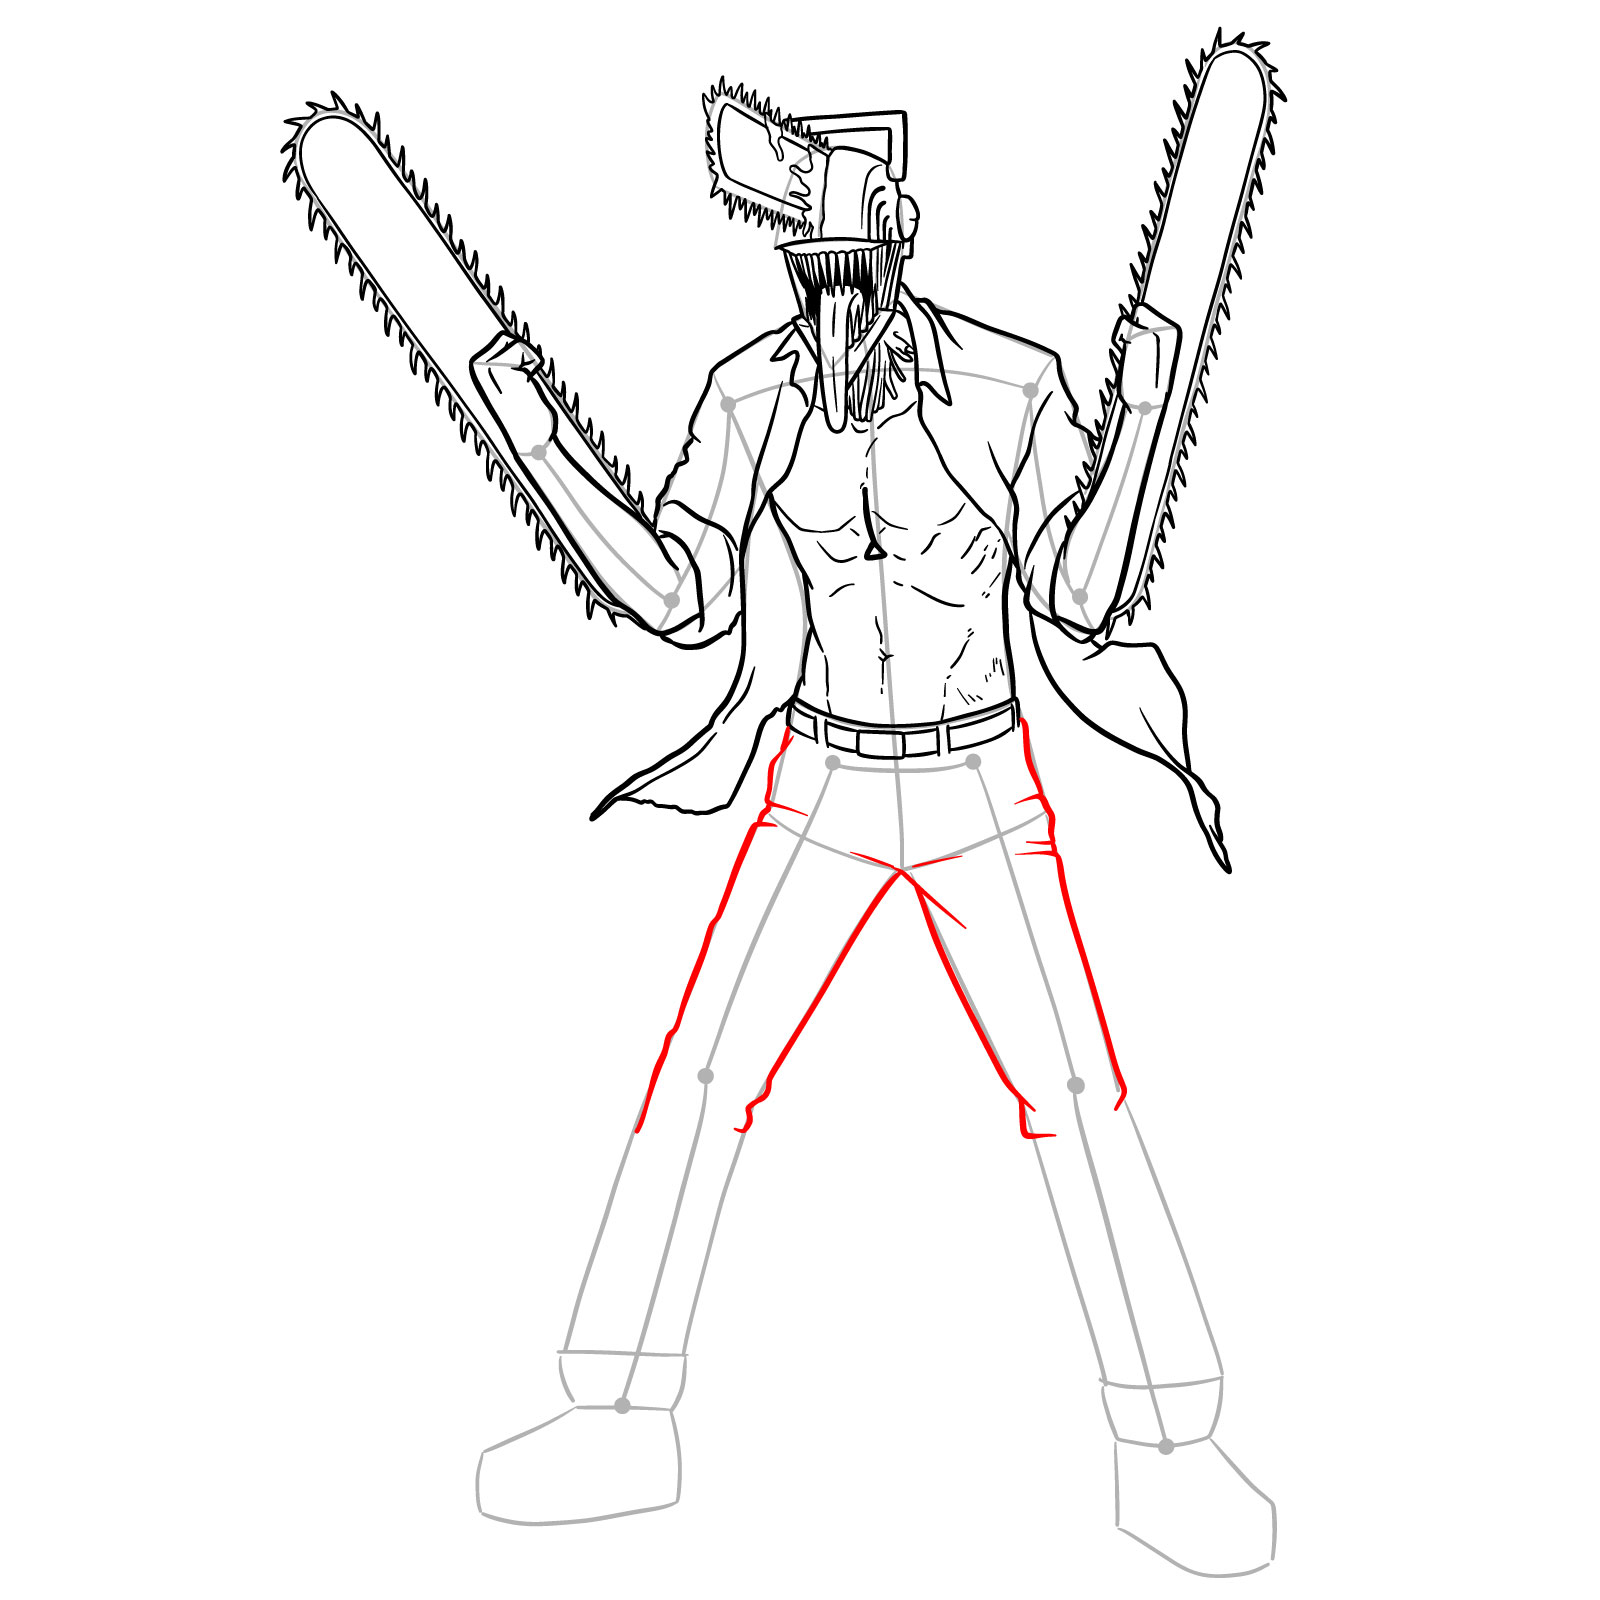 A drawing step showing the pants sketched from the waist down to the knees for the Chainsaw Man character - step 25